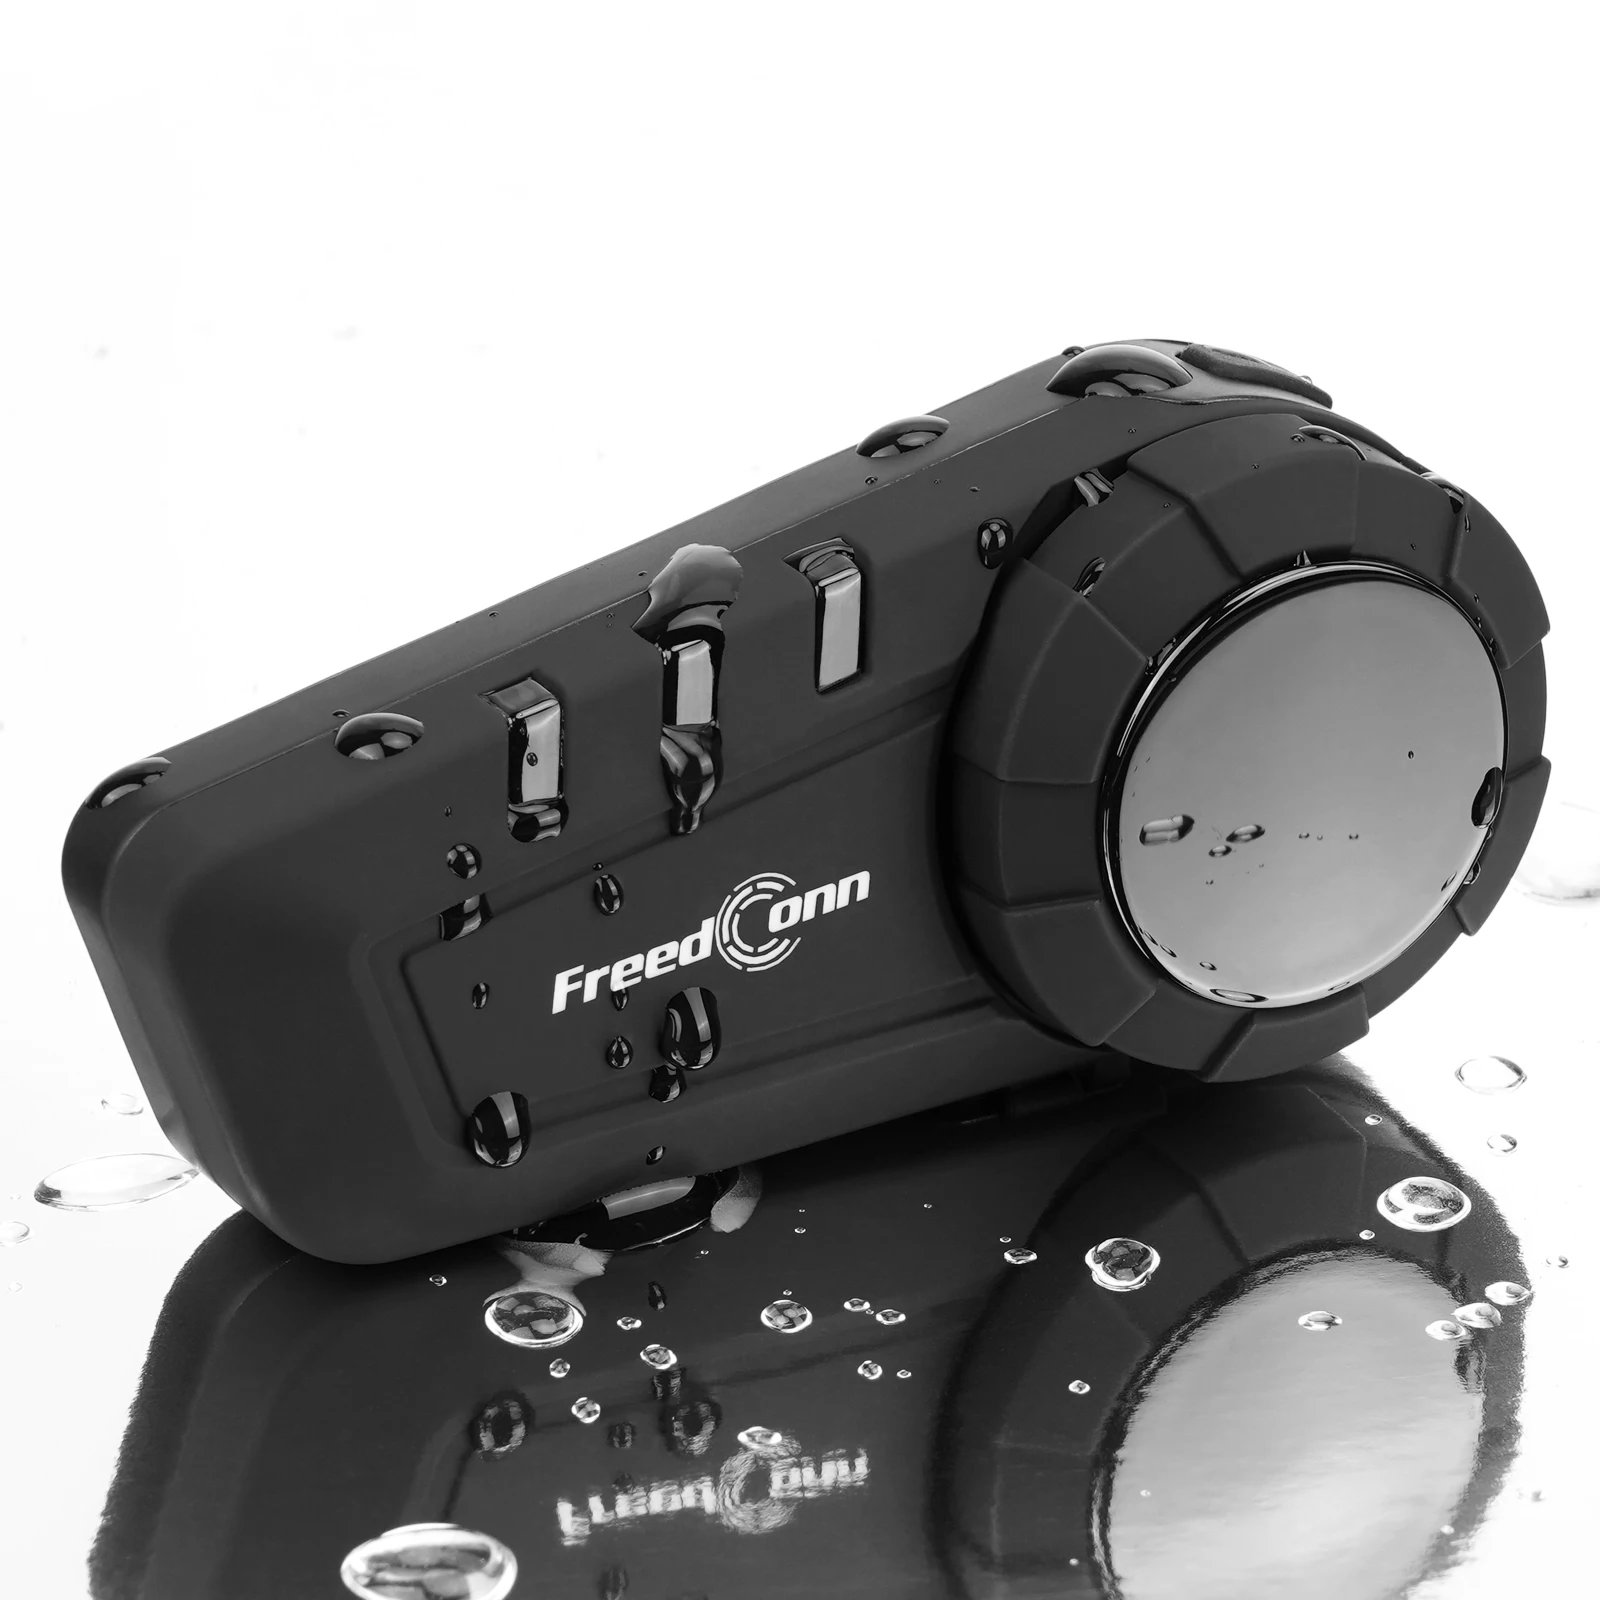 

Newest Freedconn KY-Pro Waterproof Motorcycle Wireless BT Headset Supports 6-way Intercom at the same time